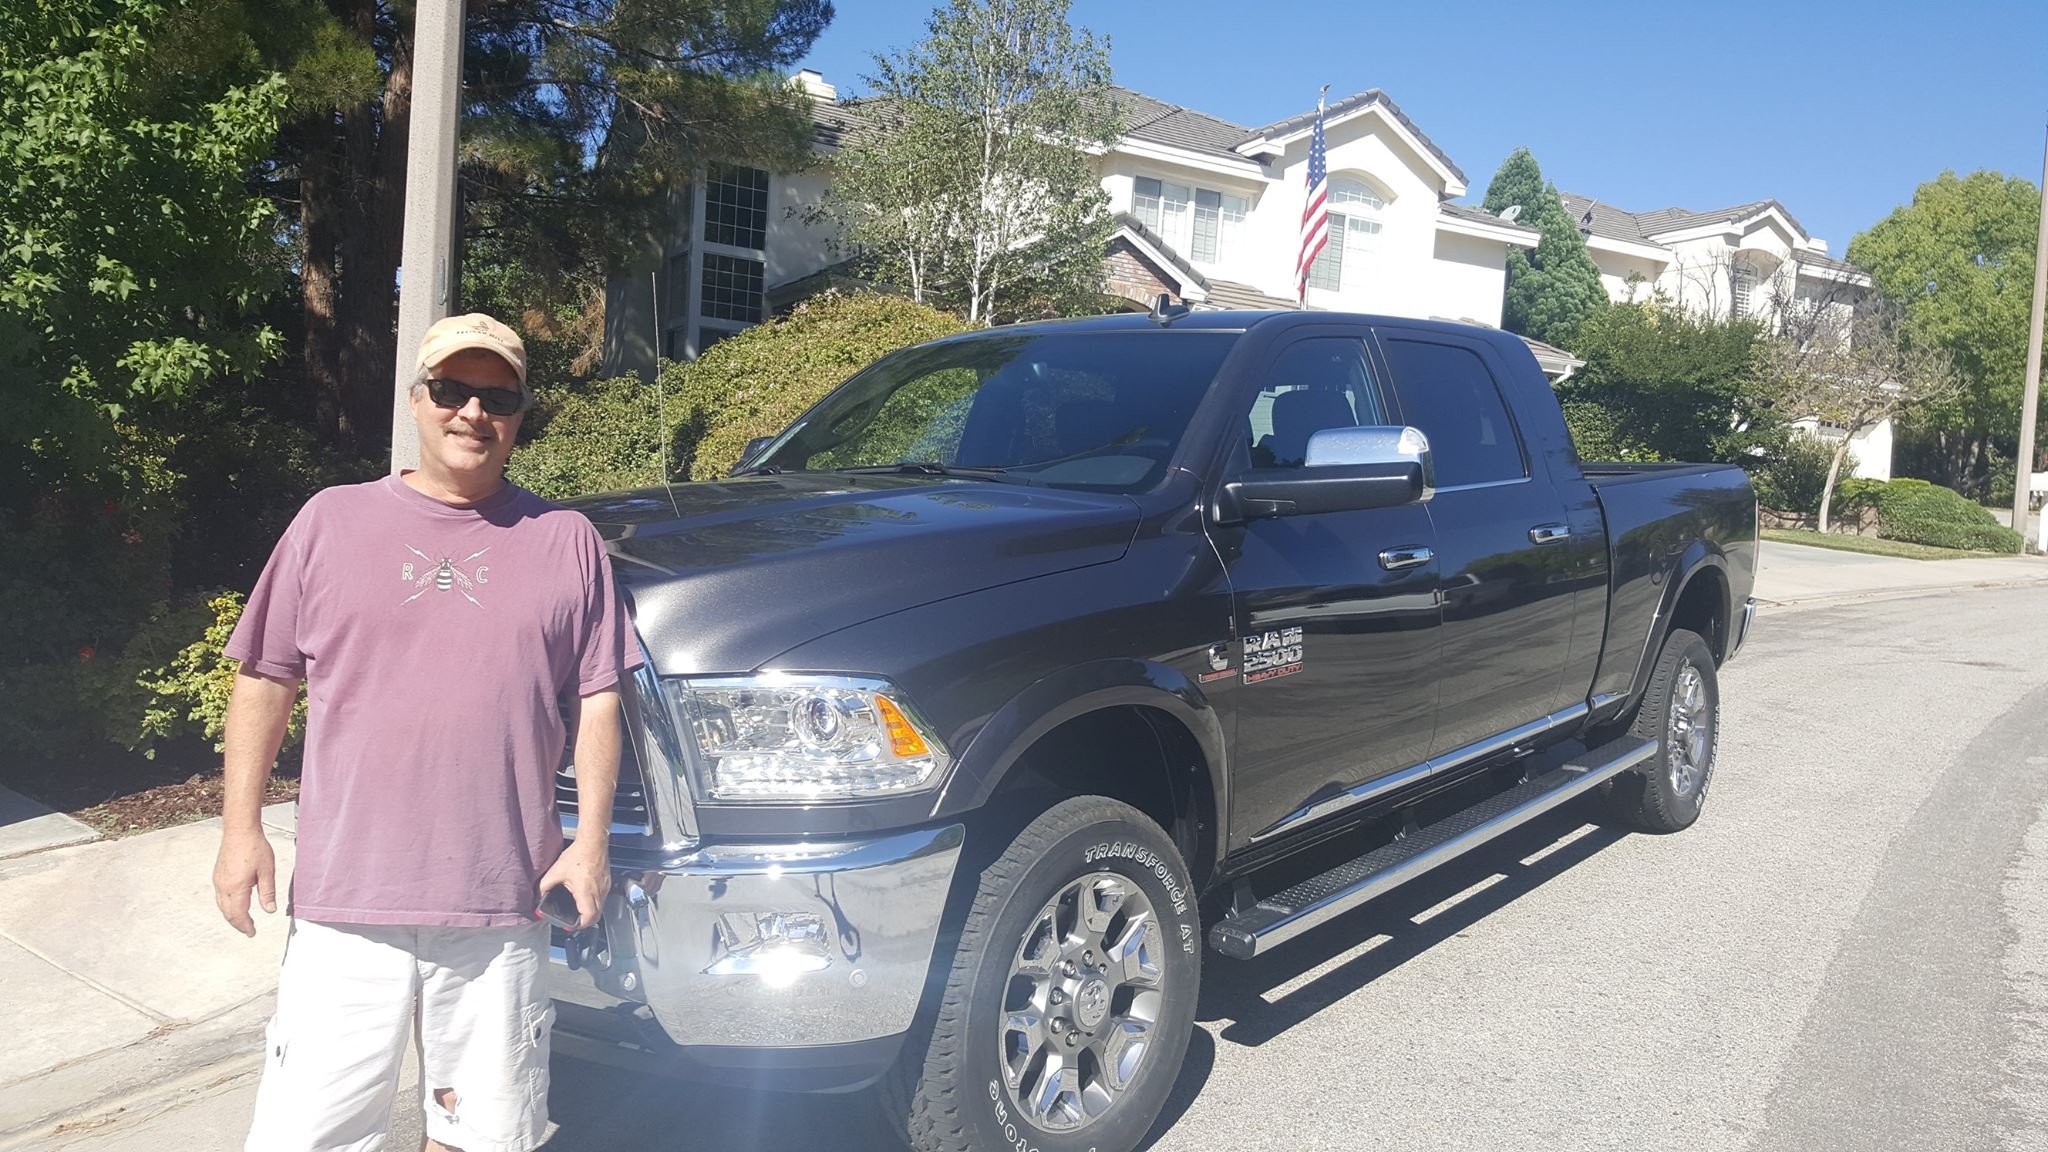 Dodge Truck Purchase - Thanks Kevin!  Enjoy it in Colorado!